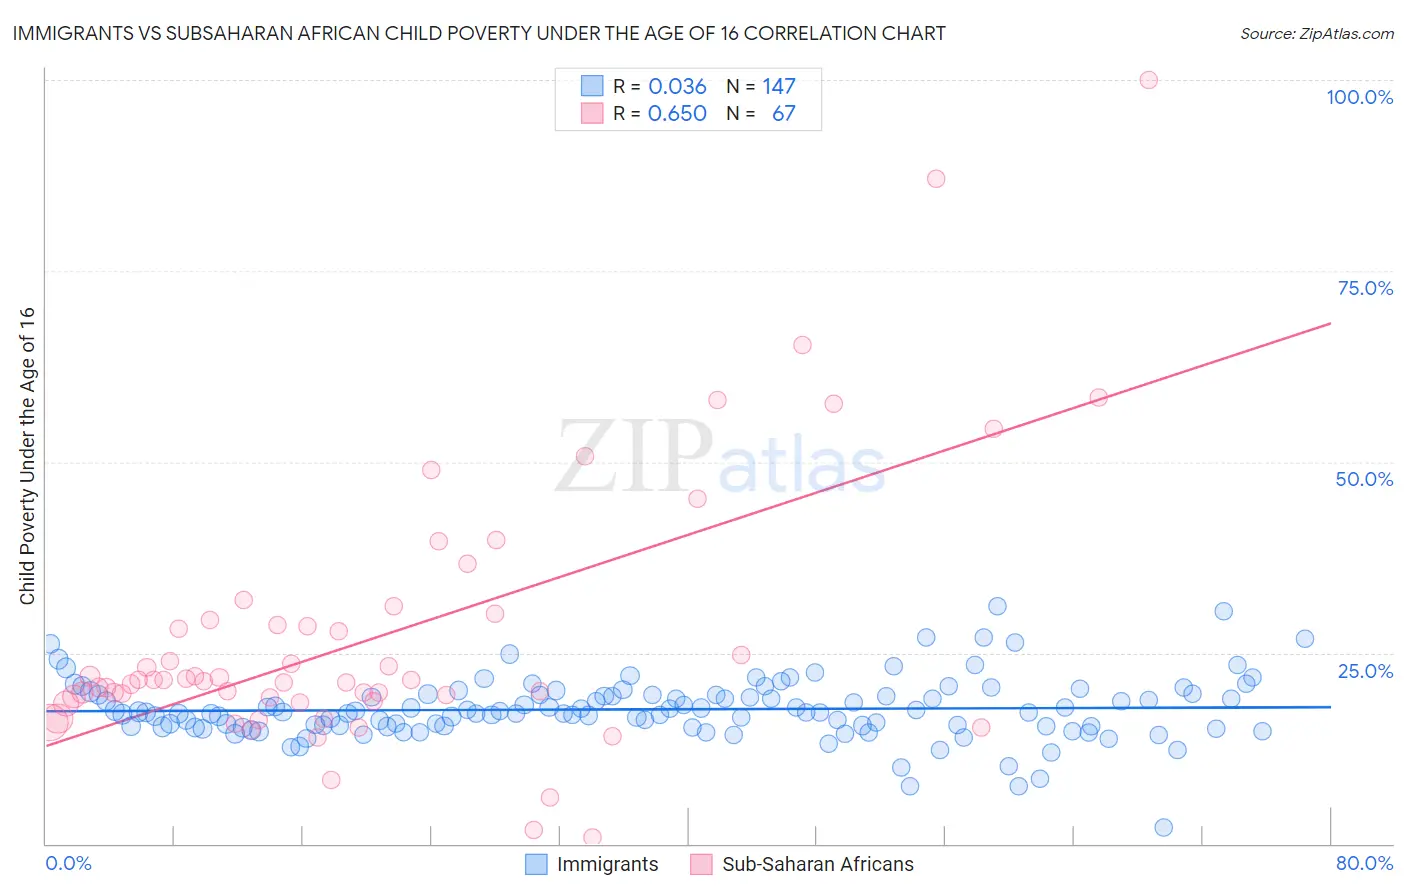 Immigrants vs Subsaharan African Child Poverty Under the Age of 16